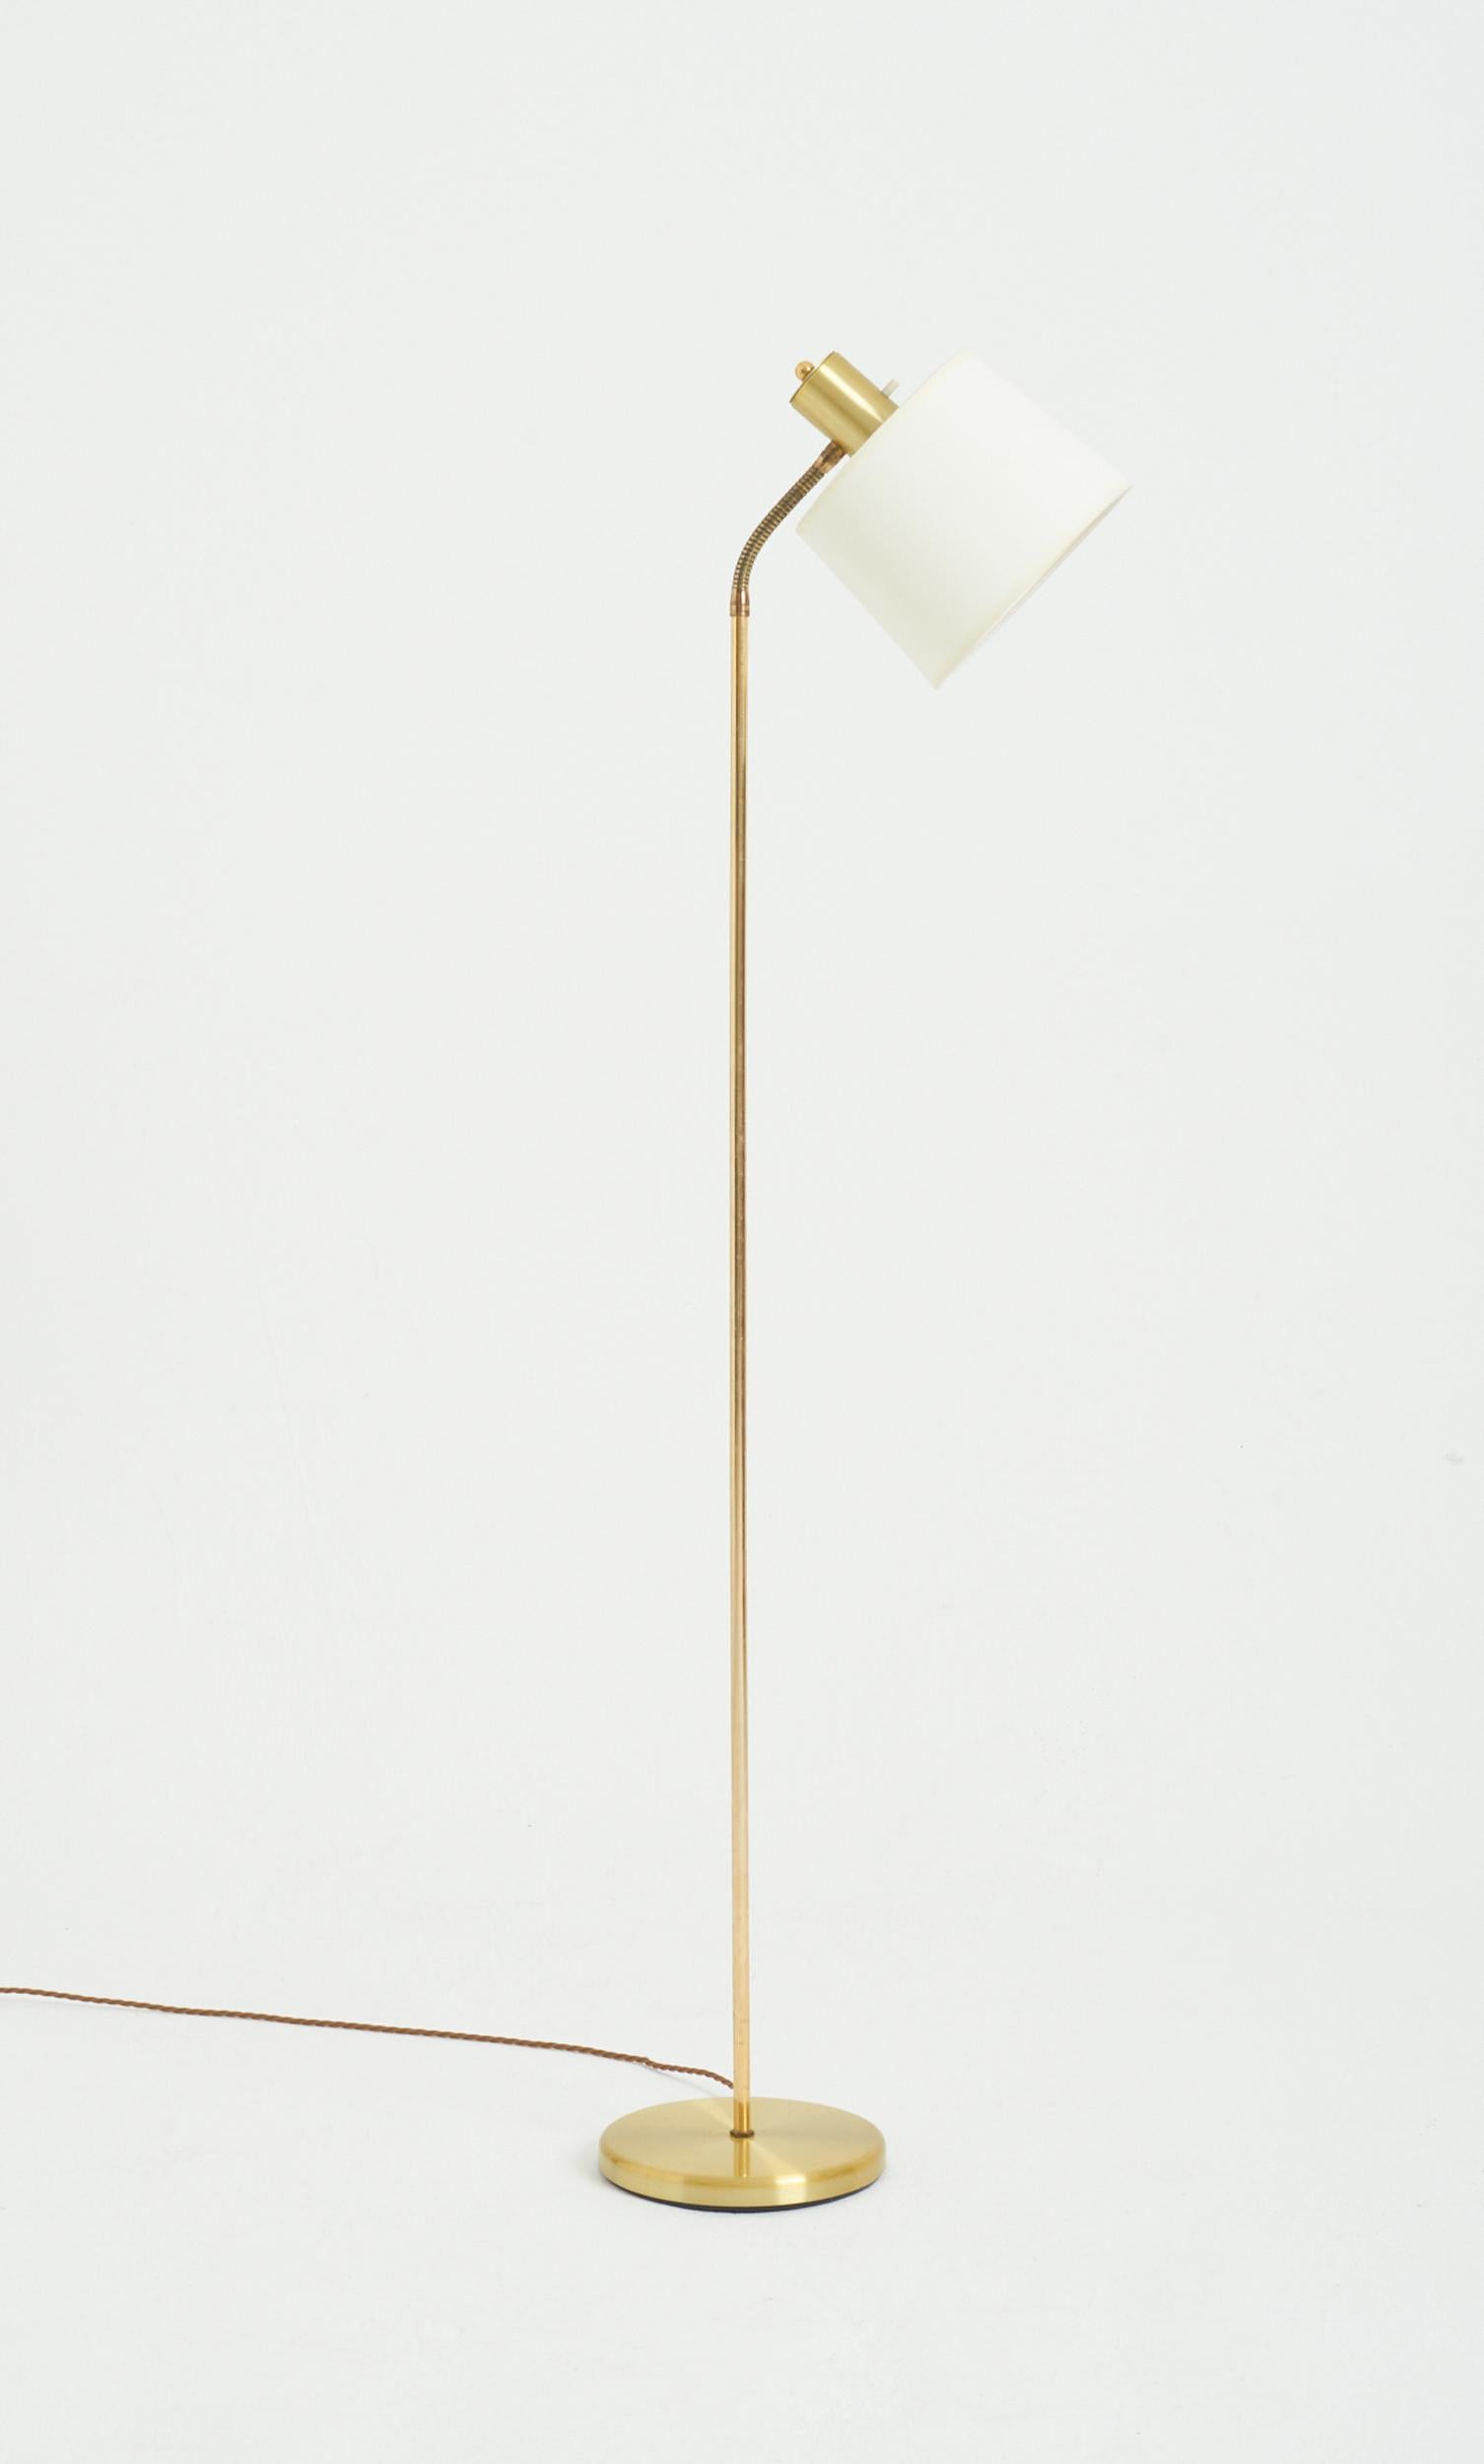 A brass reading floor lamp
Sweden, 1970-80s
134 cm high by 21.5 cm wide by 27 cm depth